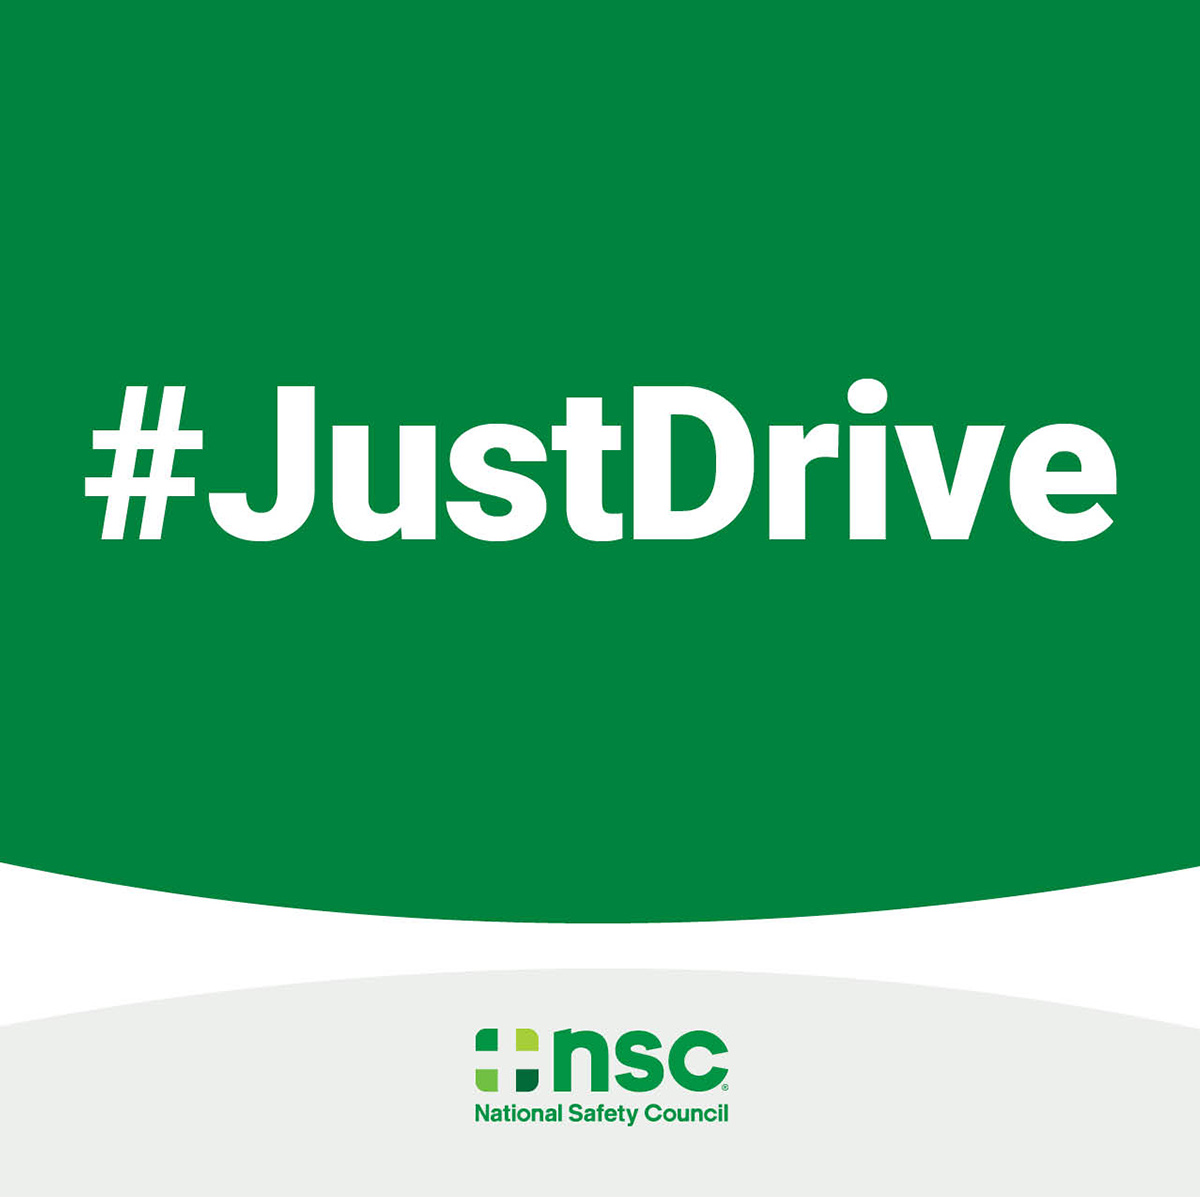 Enabling Do Not Disturb mode, taking care of texts and emails before you drive, and setting up your GPS or music while still parked can help us #KeepEachOtherSafe on the road. Take the @NSCsafety #JustDrive Pledge: bit.ly/3u5Yvpa
#DistractedDrivingAwarenessMonth